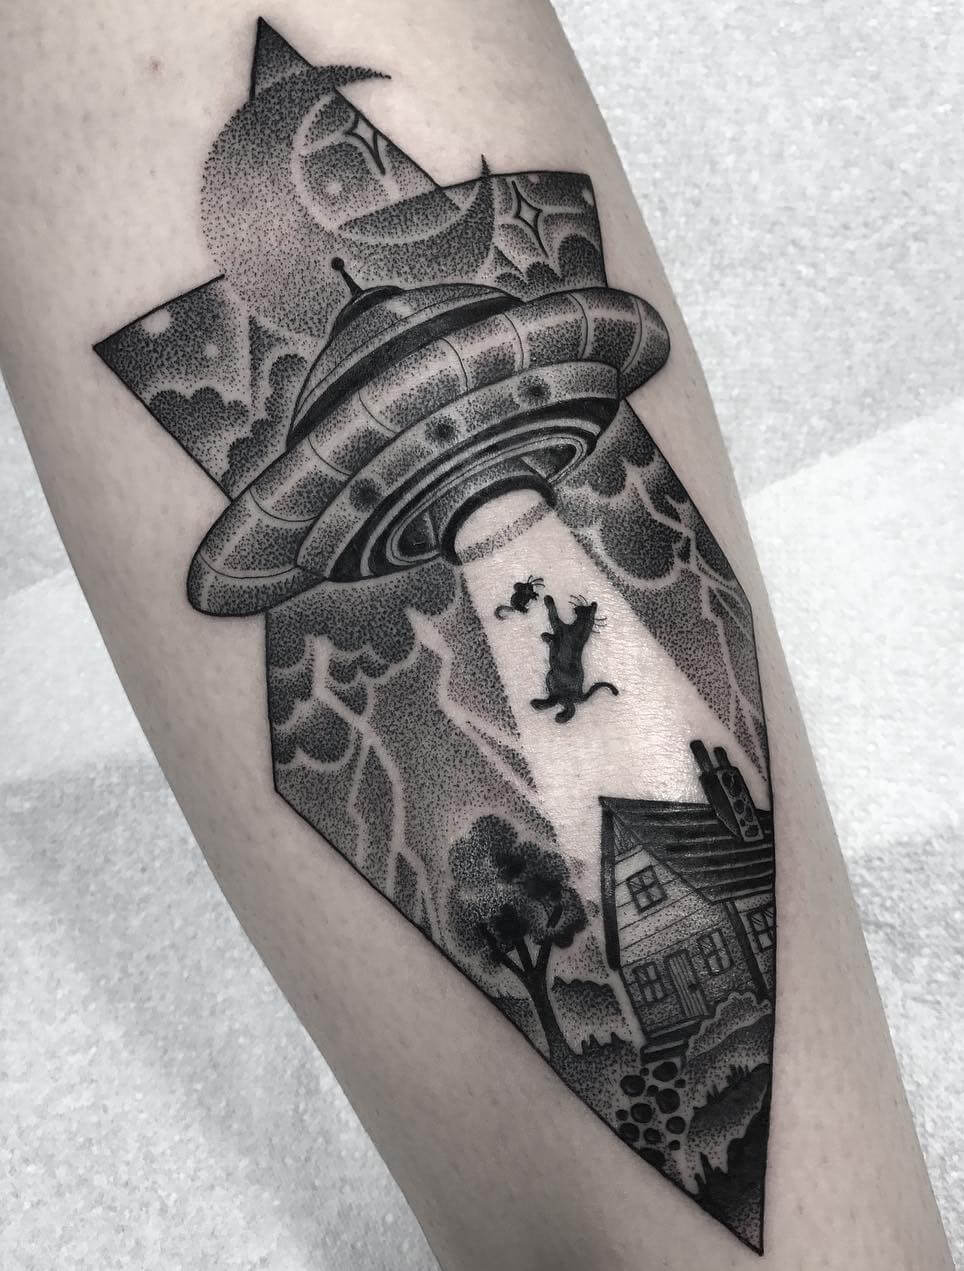 UFO abducting cat & mouse tattoo by amyvsavage